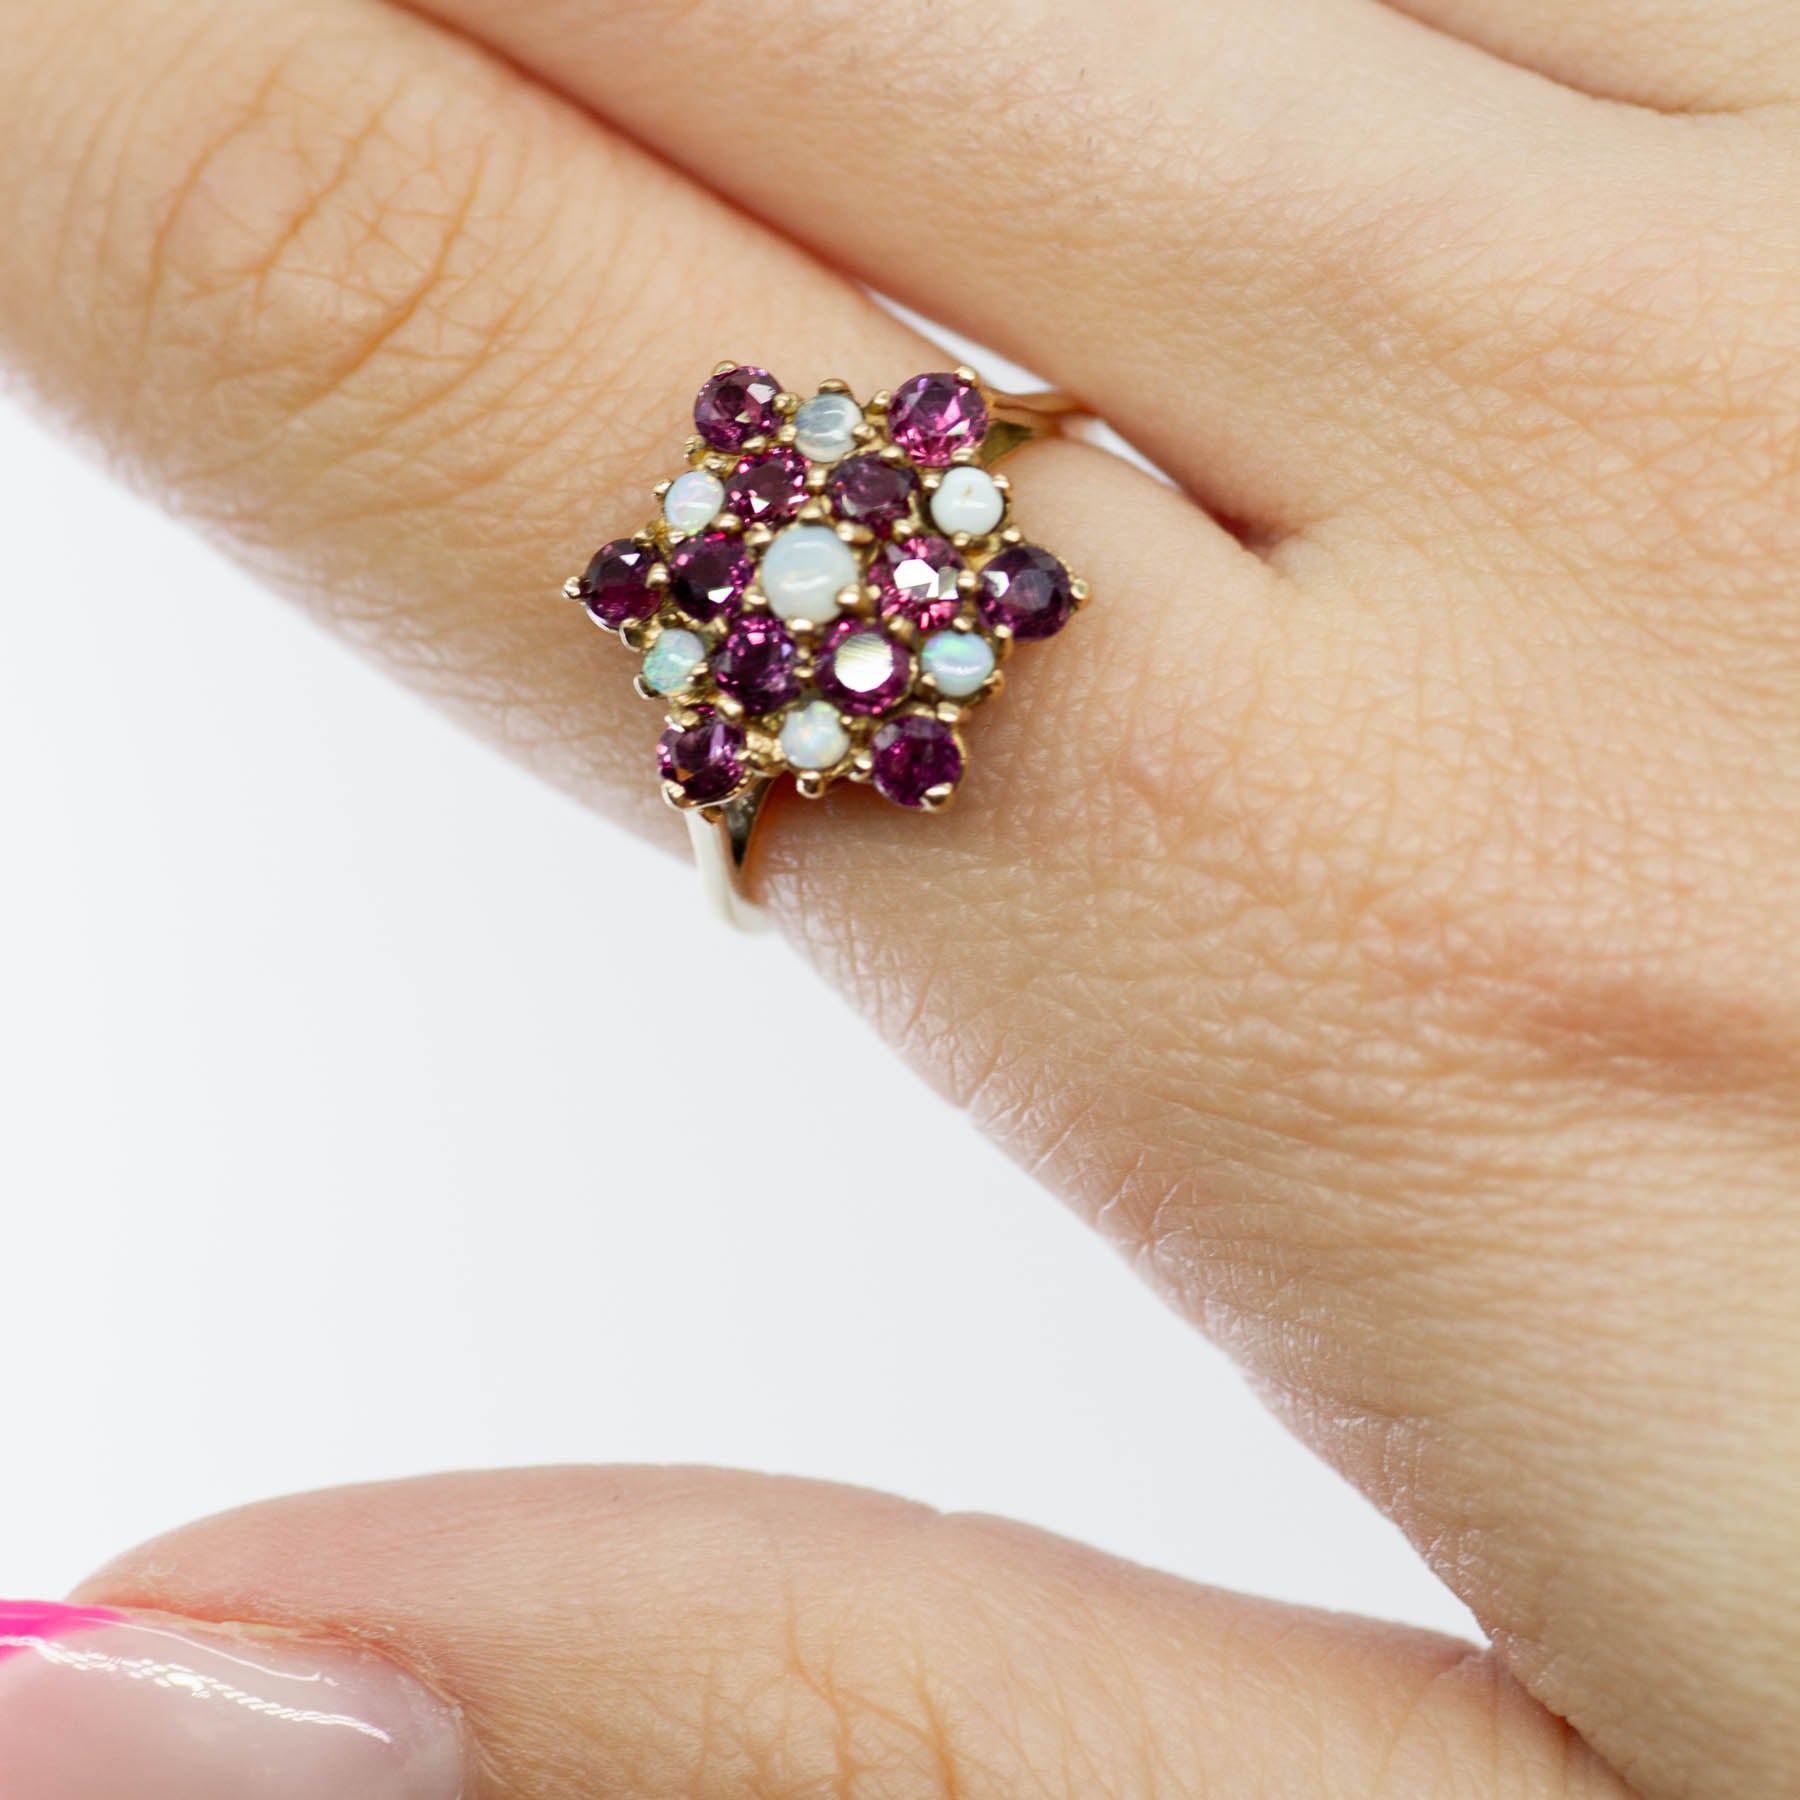 1979 London Hallmarked Ruby and Opal Cluster Ring | 1.32 ctw 0.32 ctw | SZ 7